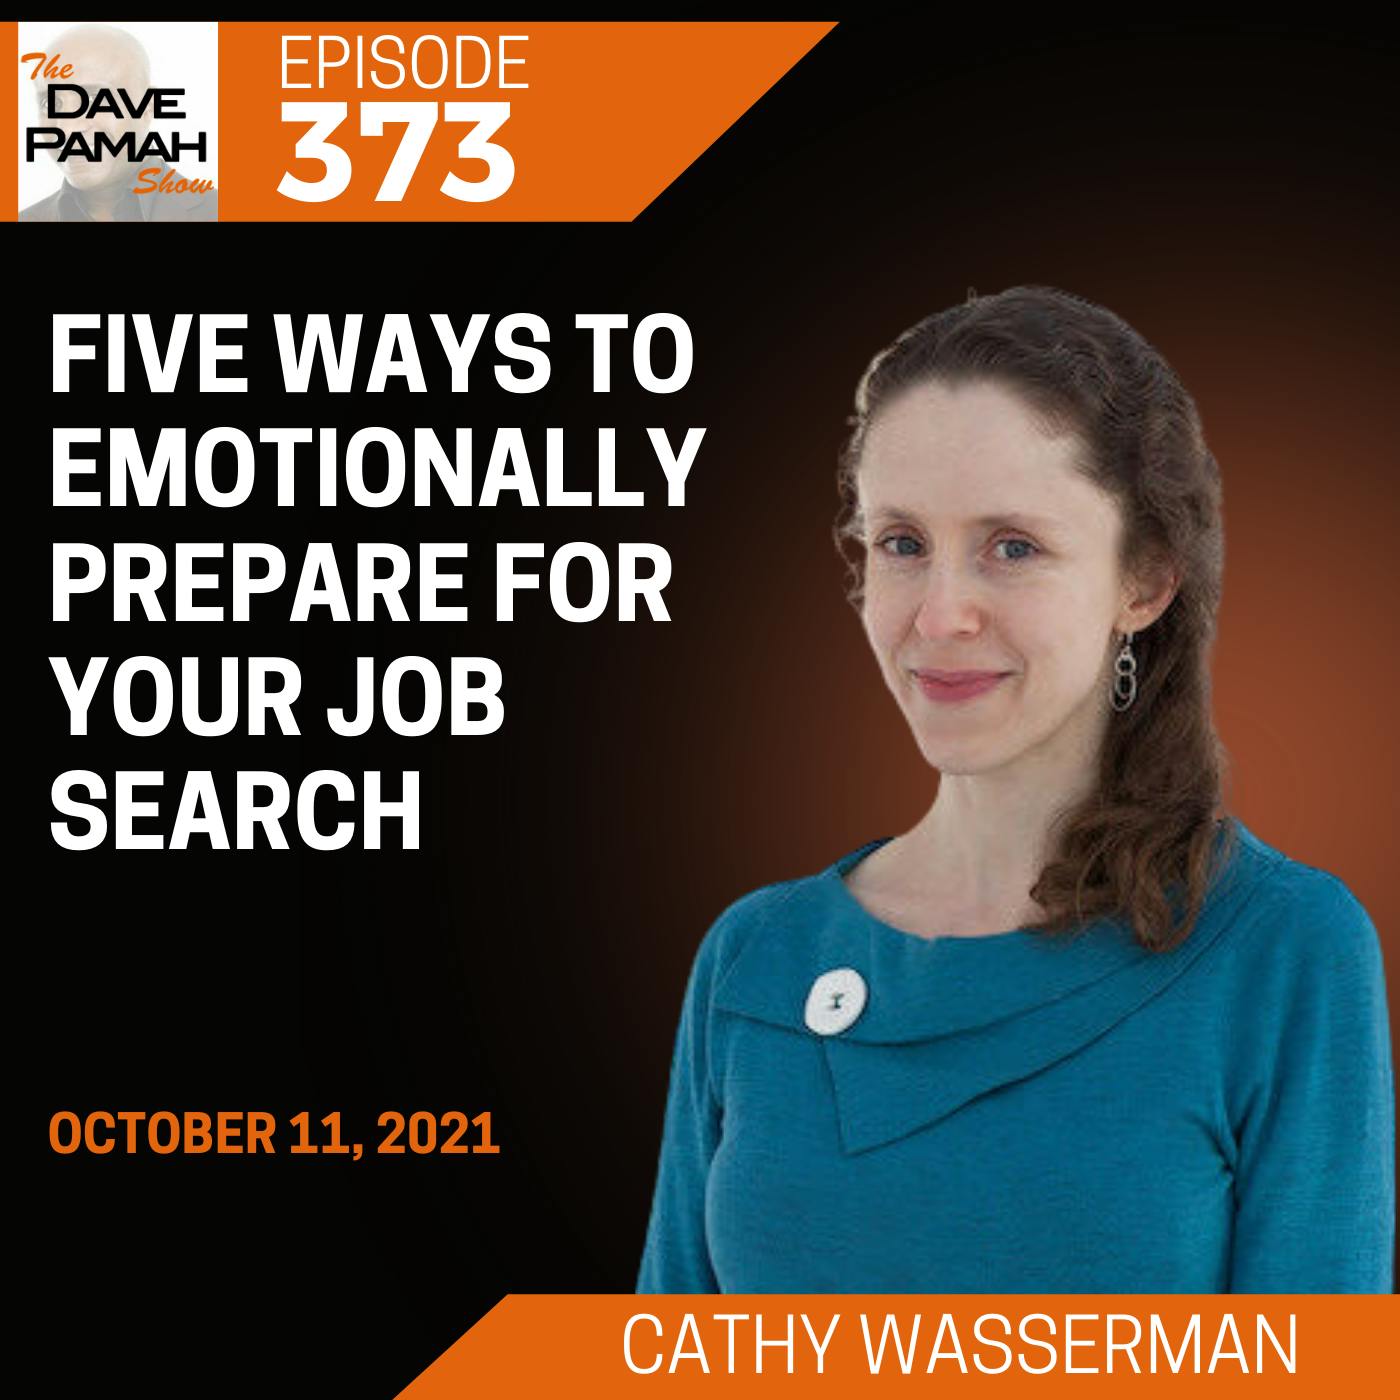 Five ways to emotionally prepare for your job search with Cathy Wasserman Image